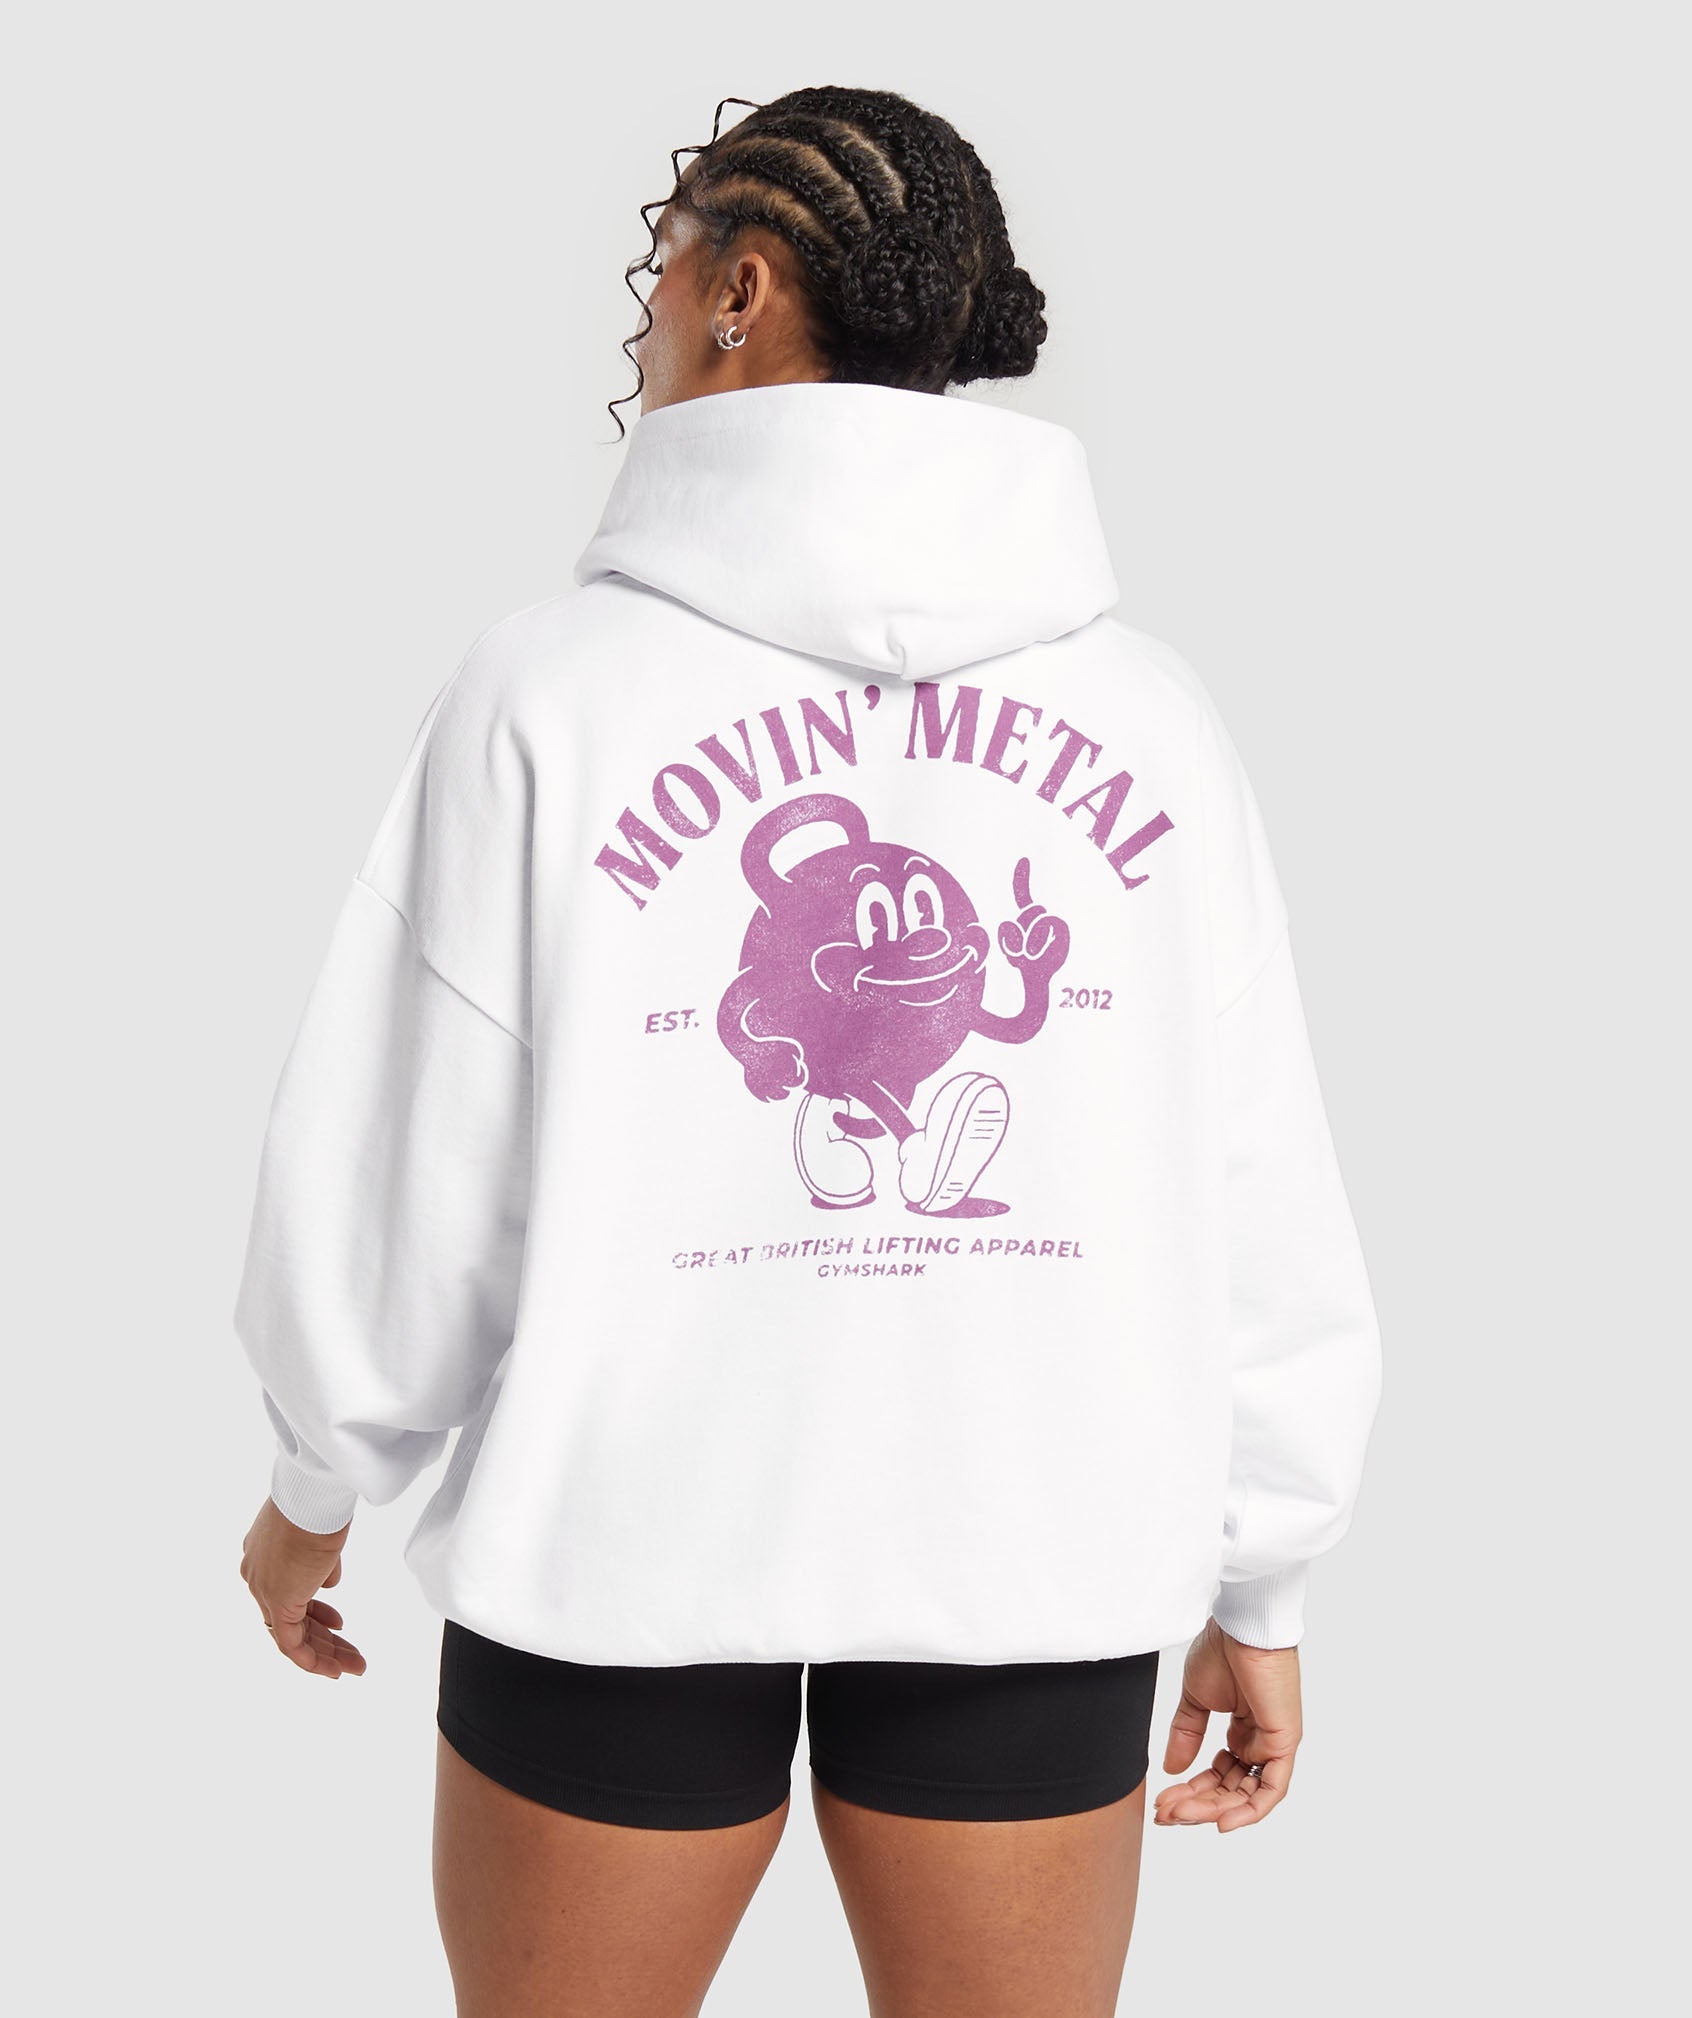 Movin' Metal GFX Hoodie in White